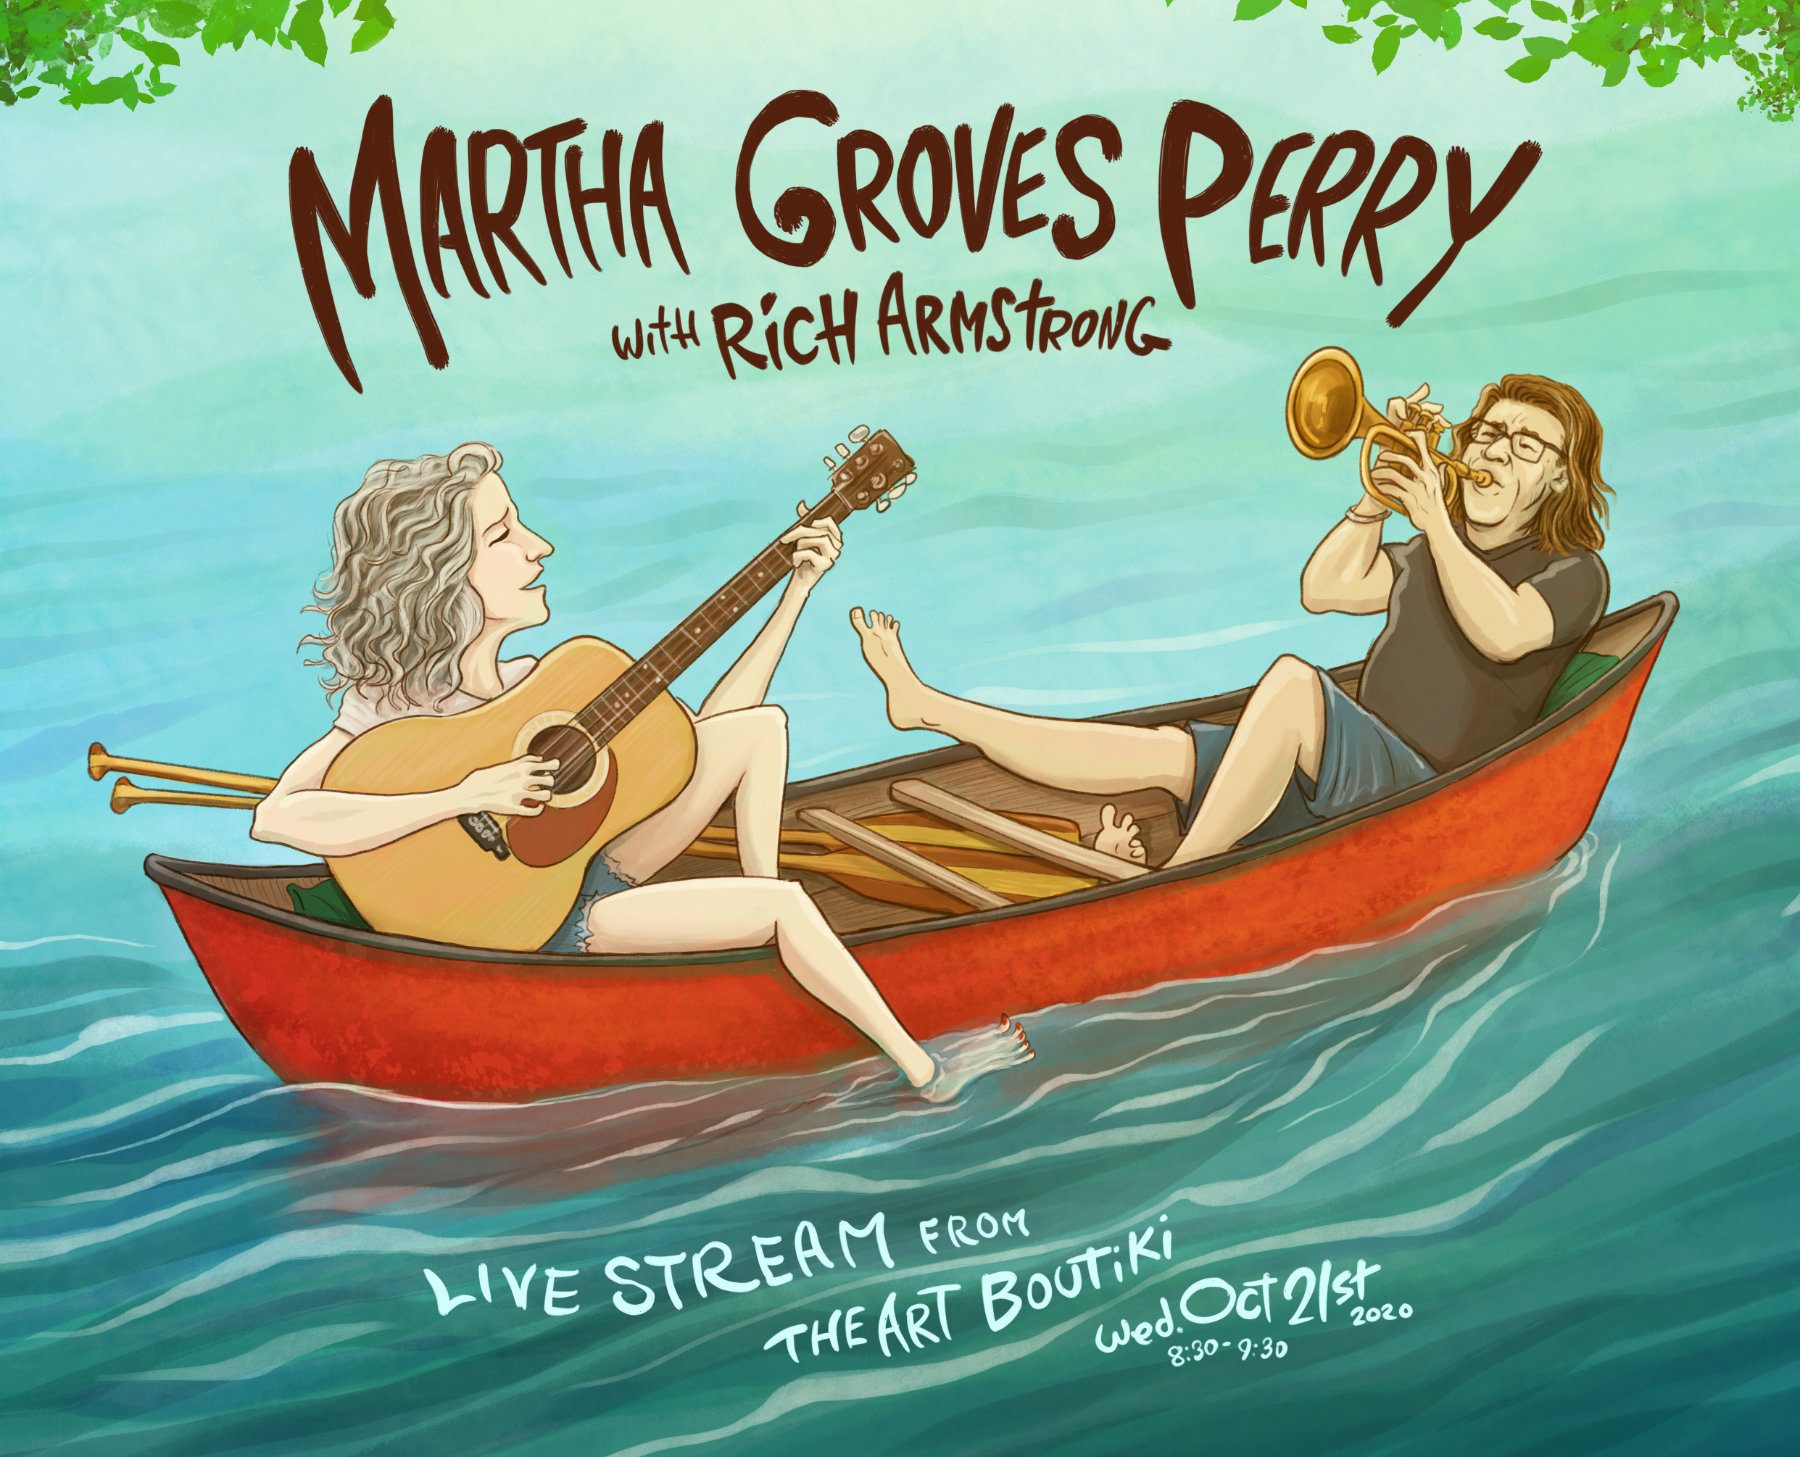 Event Graphic for Martha Groves Perry Concert